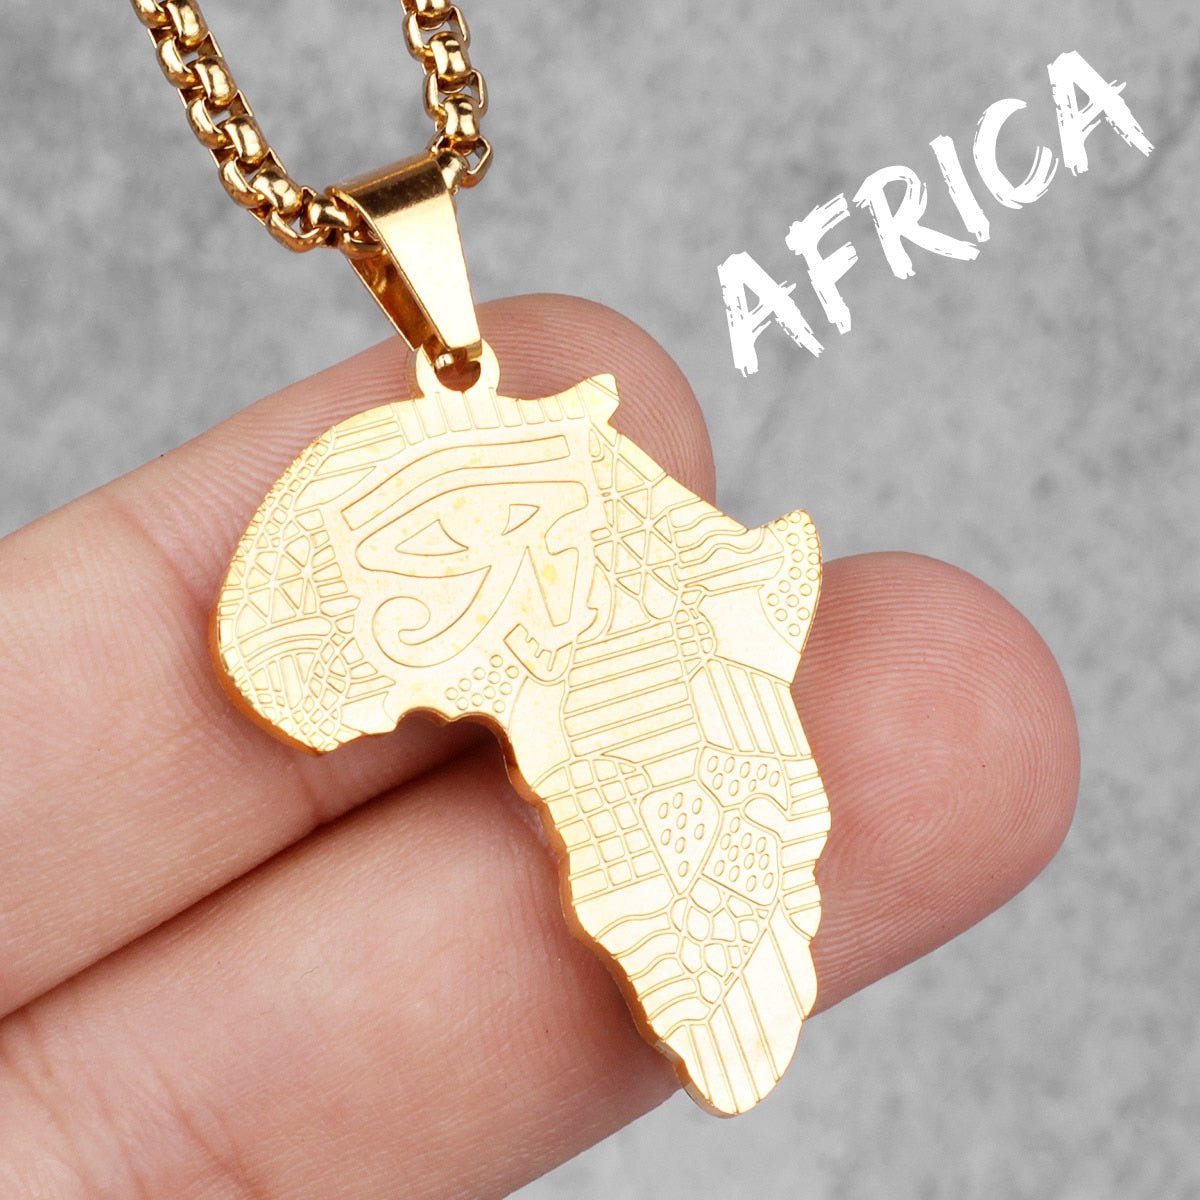 Golden Safari: Bold Africa Map Necklace for Men Stainless Steel Pendant Chain - Flexi Africa - Free Delivery Worldwide